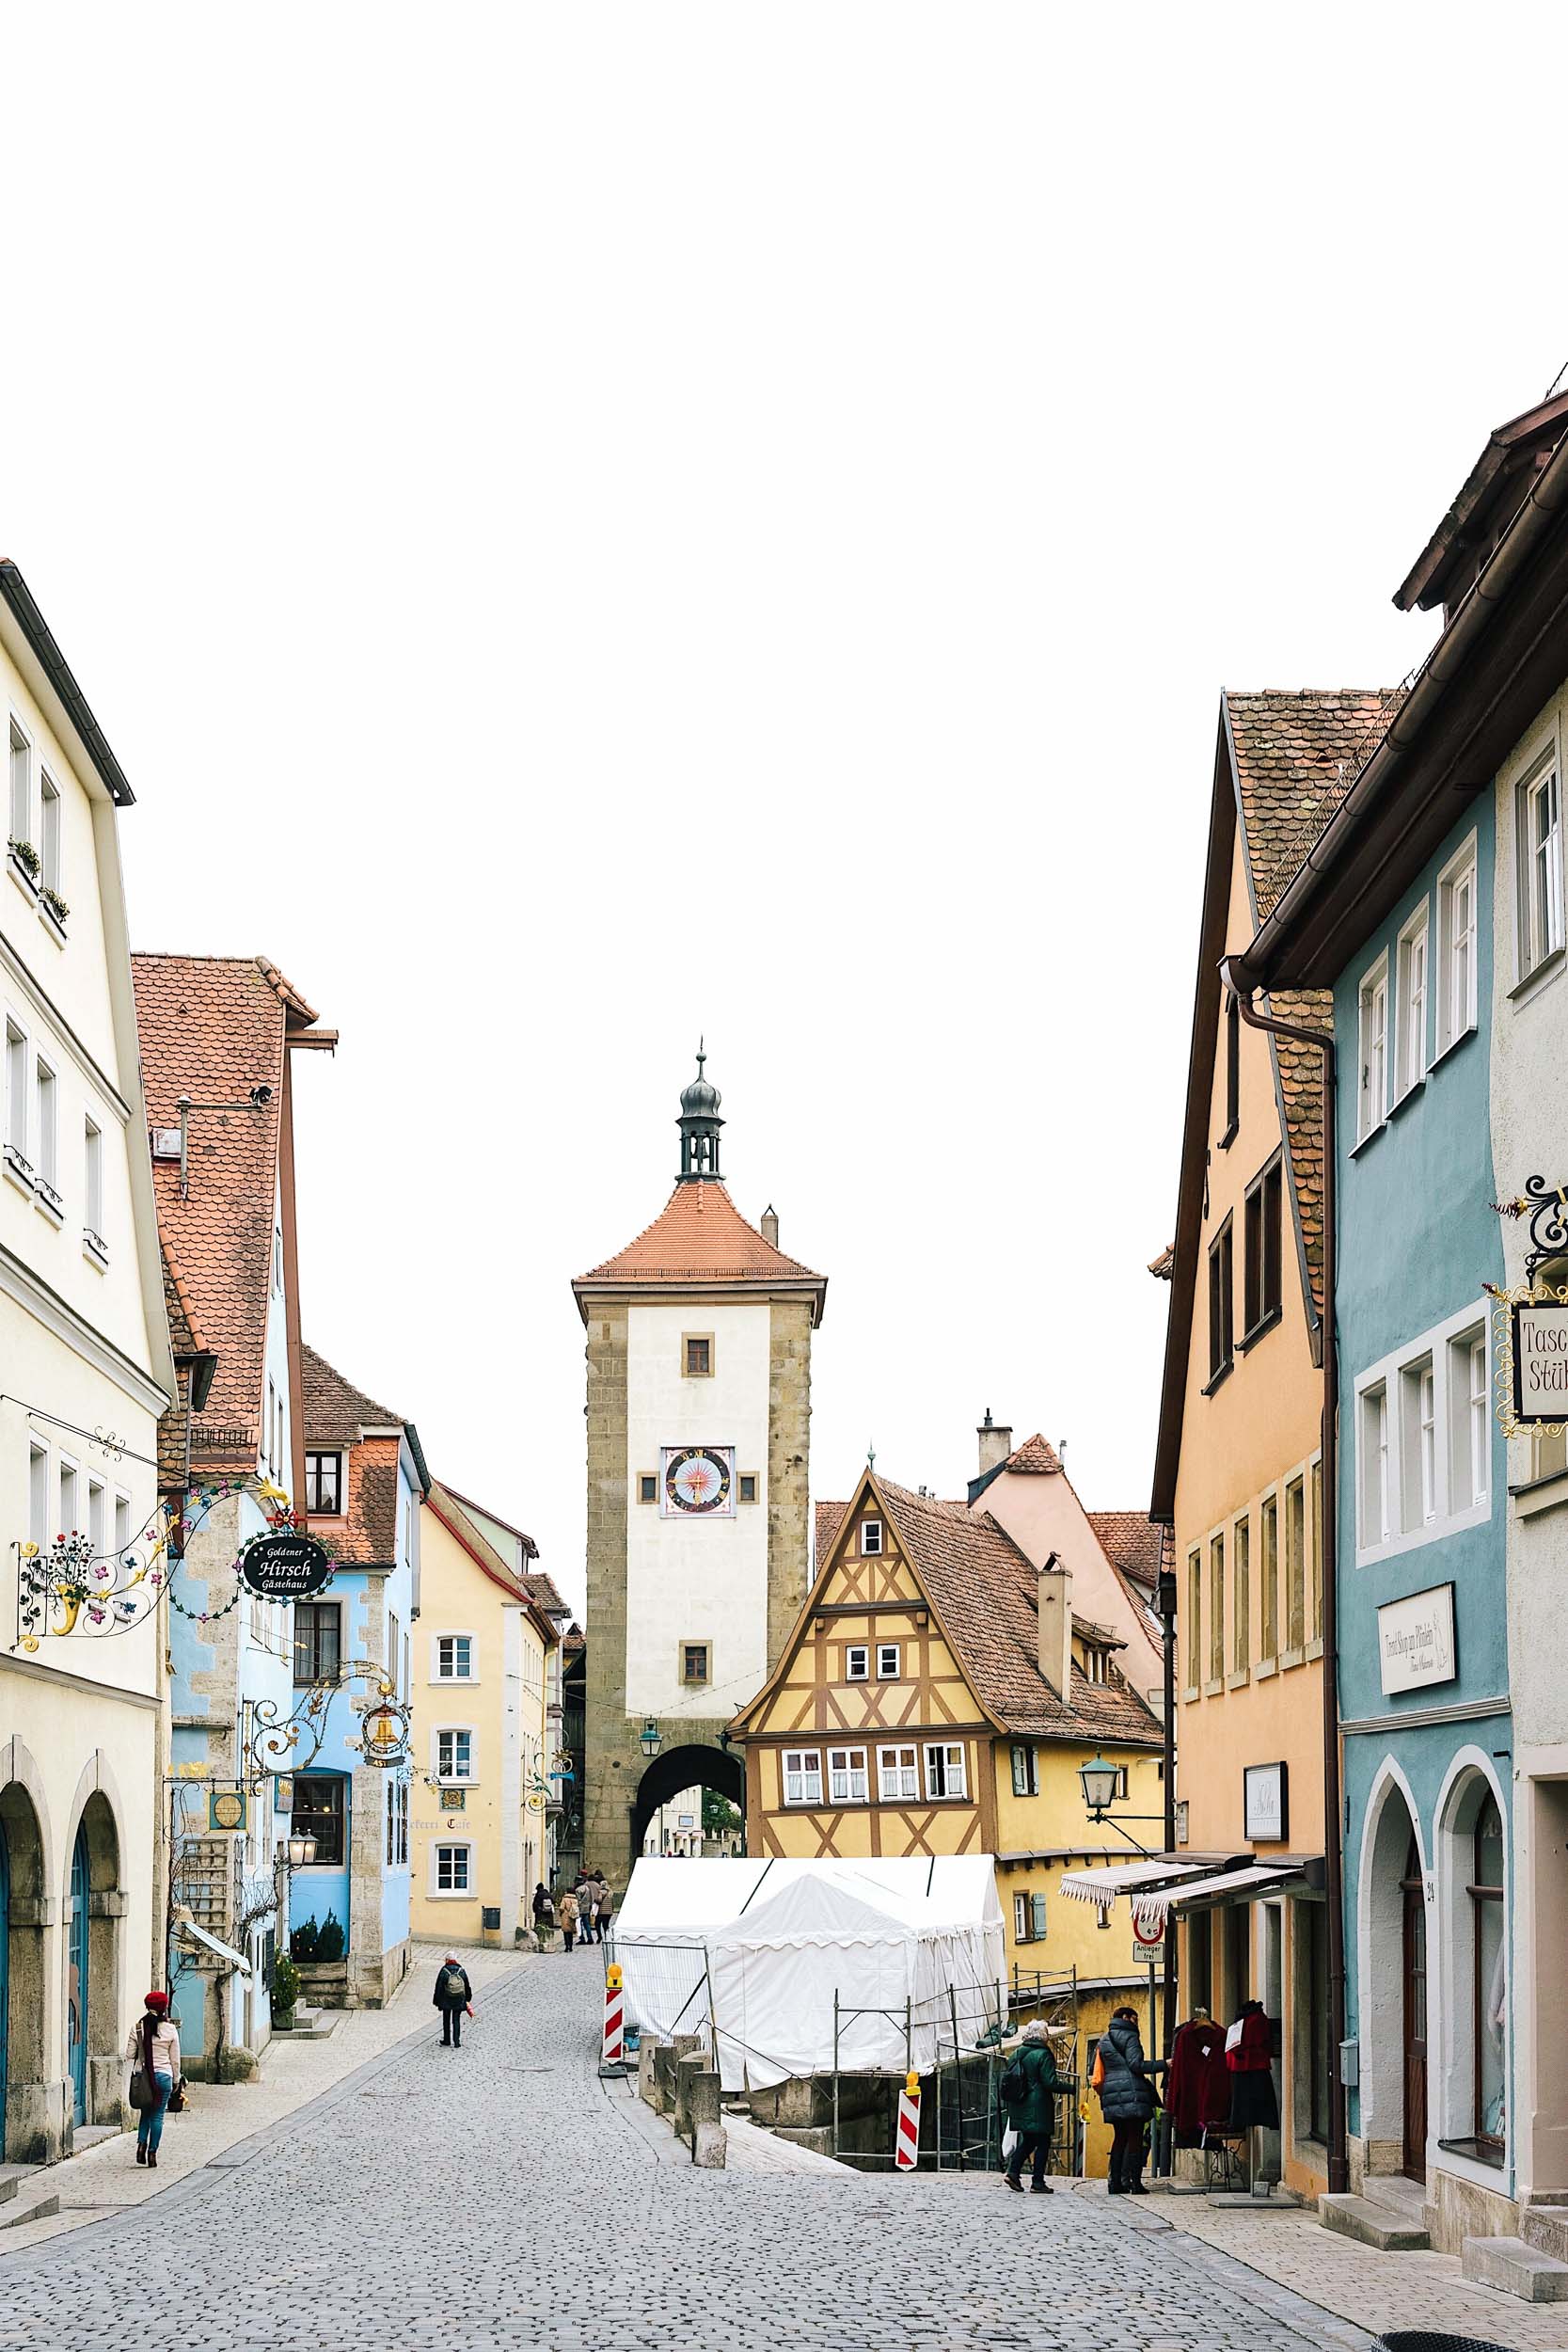 The iconic Rothenburg viewpoint 